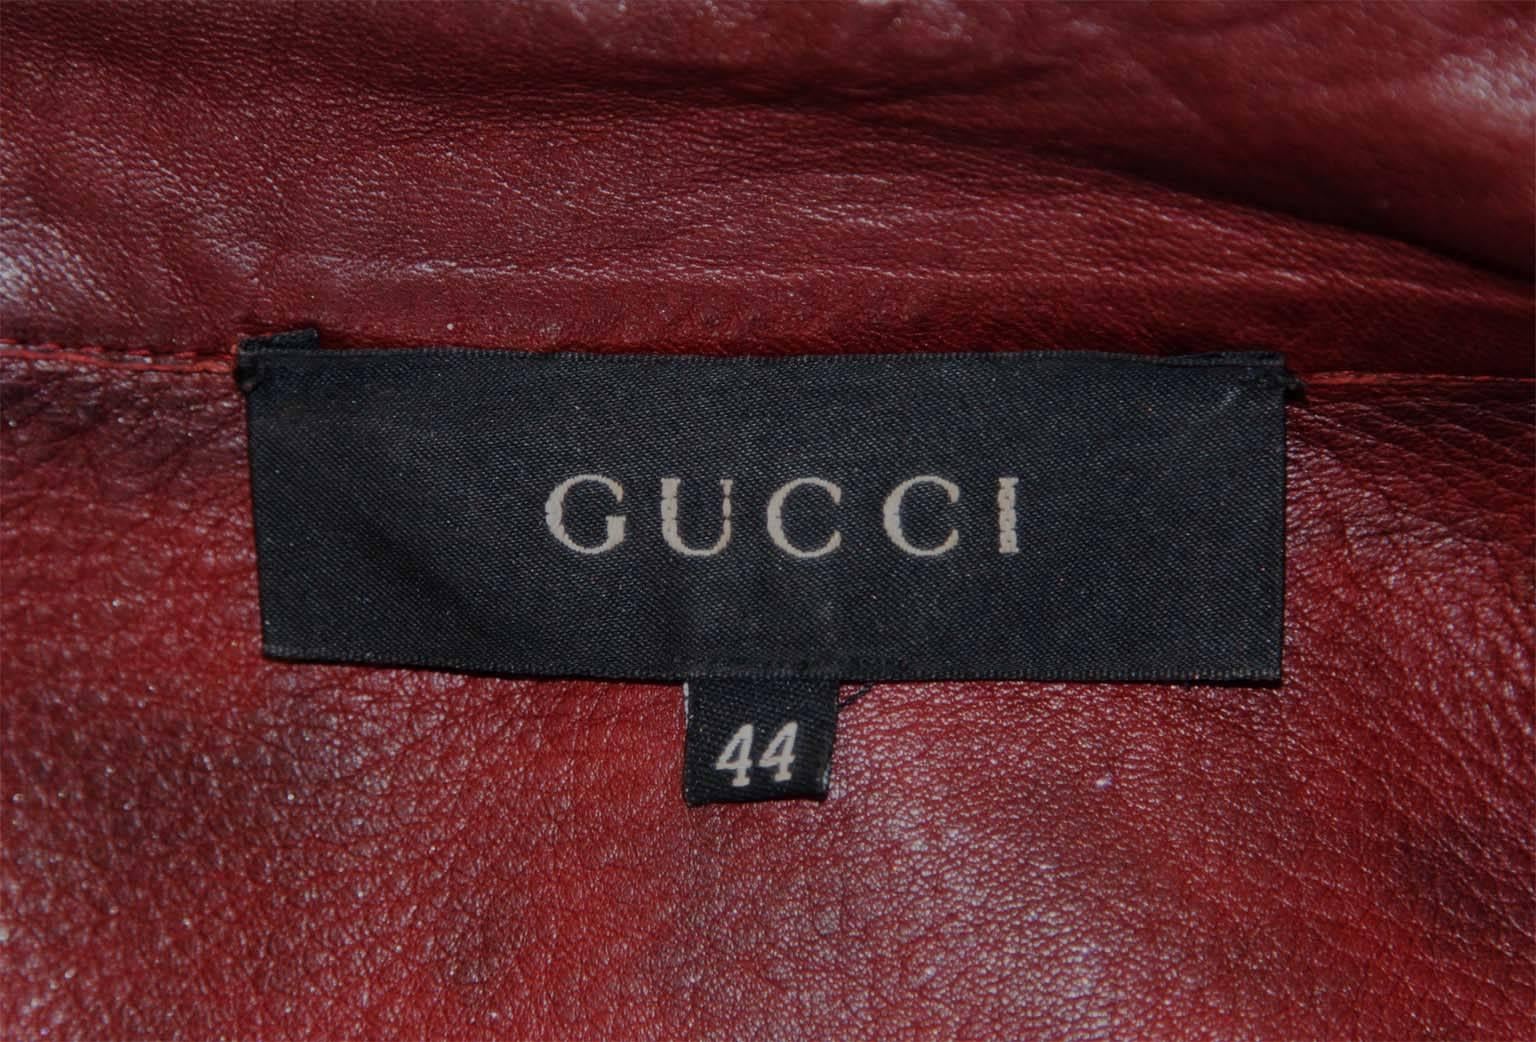 Free Shipping: Rare Tom Ford Gucci SS1999 Maroon Leather Runway Moto Jacket IT44 2